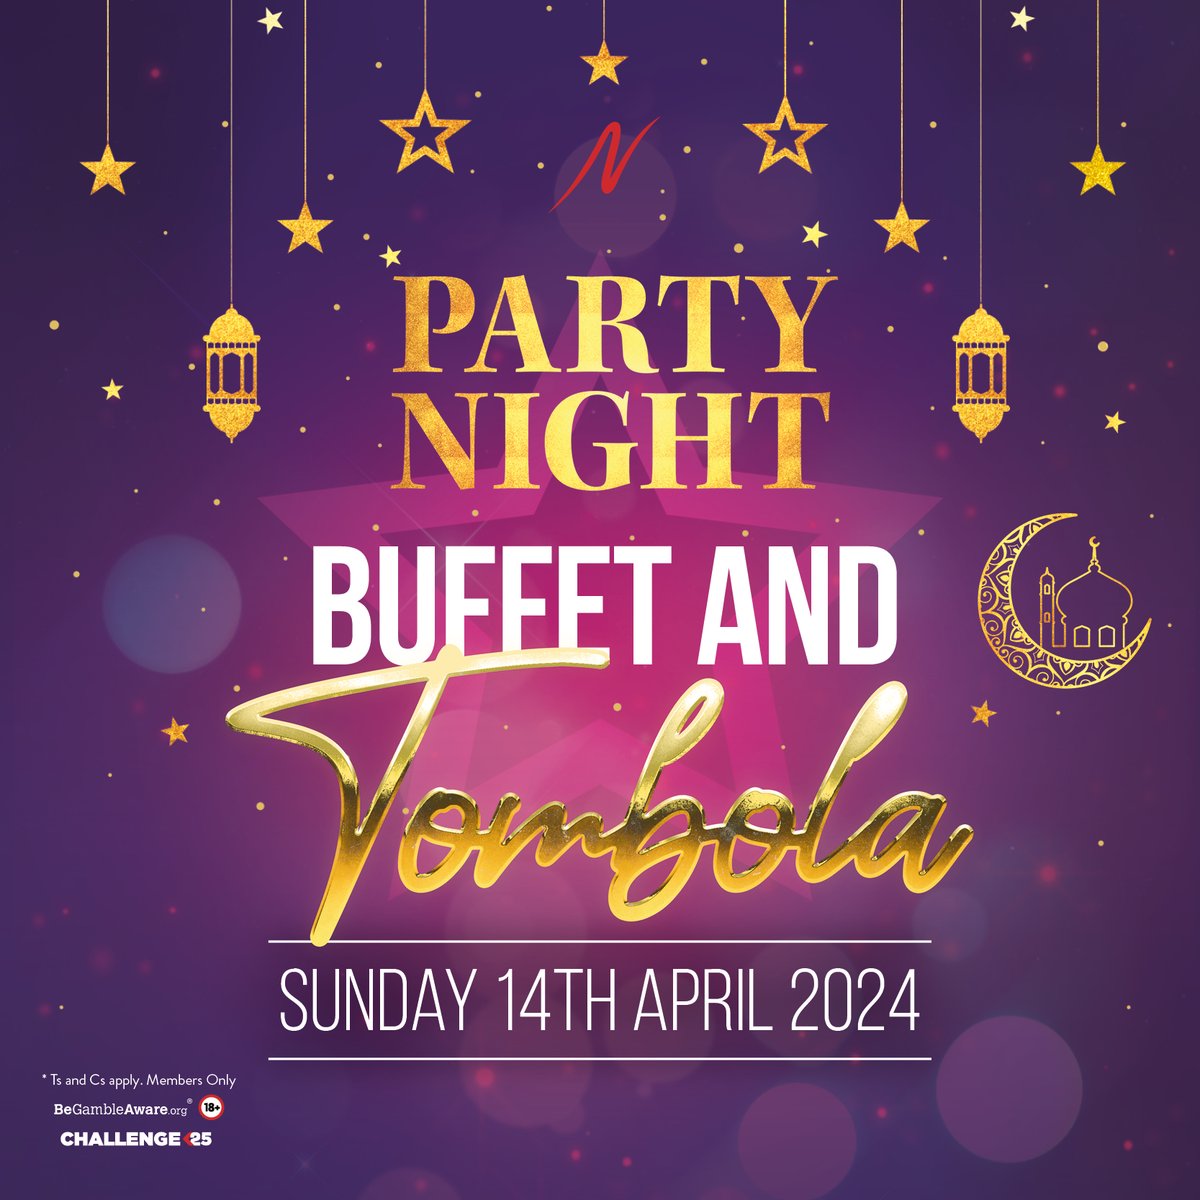 3 days to go until our Party Night 💥 Our mega £500 Freeplay tombola, means everyone's a winner! Plus, they'll be a free buffet from Aziz Catering AND a Belly Dancer from 10:30pm 🙌🏼 🌙